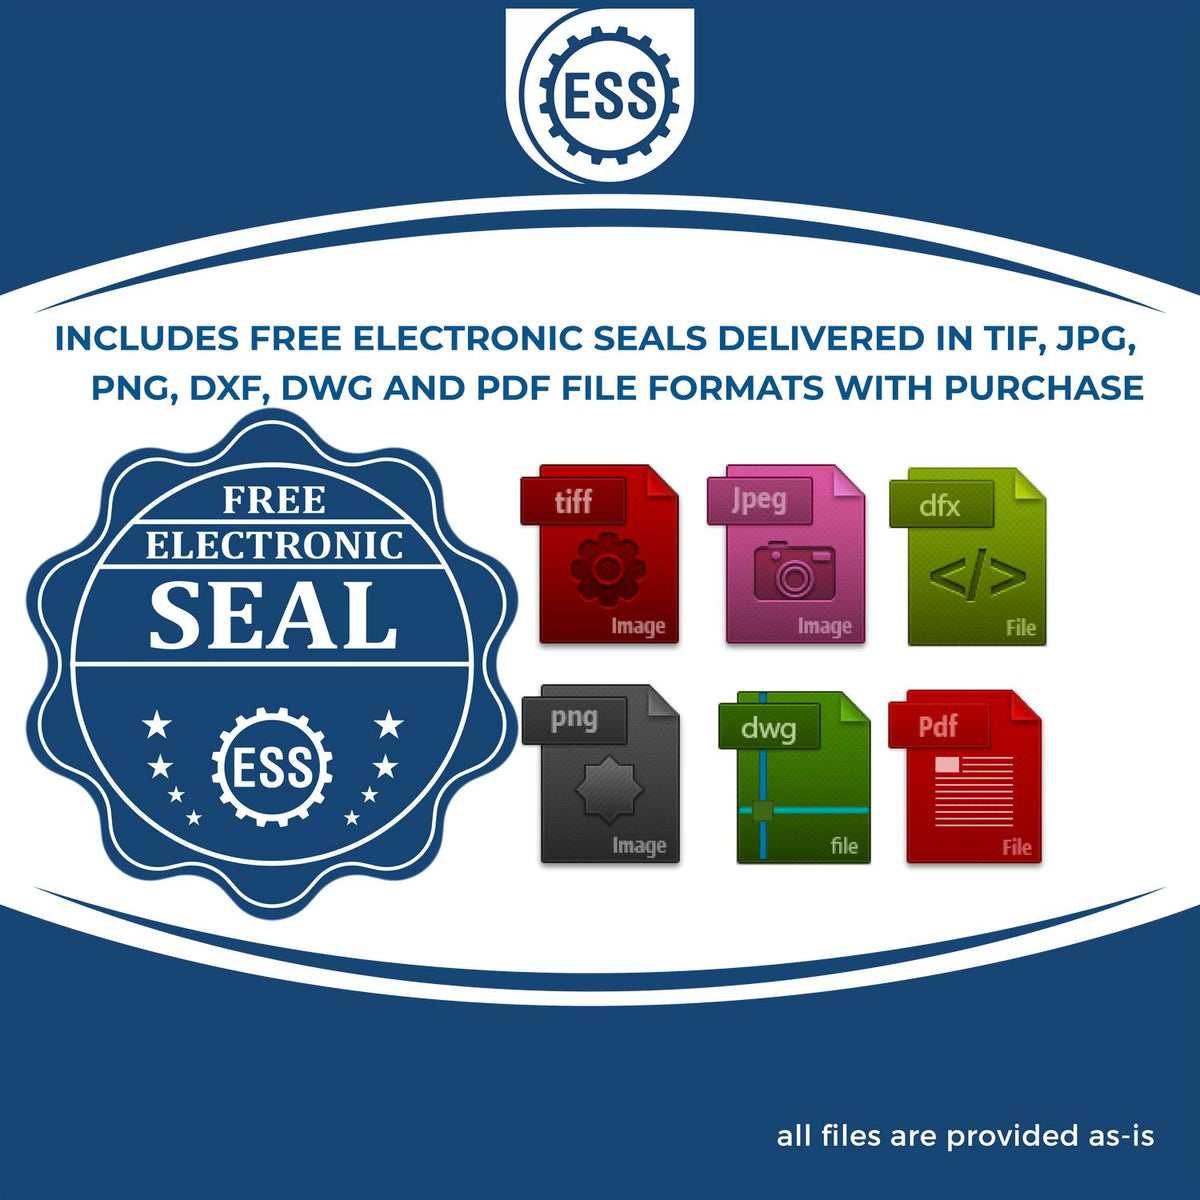 An infographic for the free electronic seal for the Gift Pennsylvania Engineer Seal illustrating the different file type icons such as DXF, DWG, TIF, JPG and PNG.